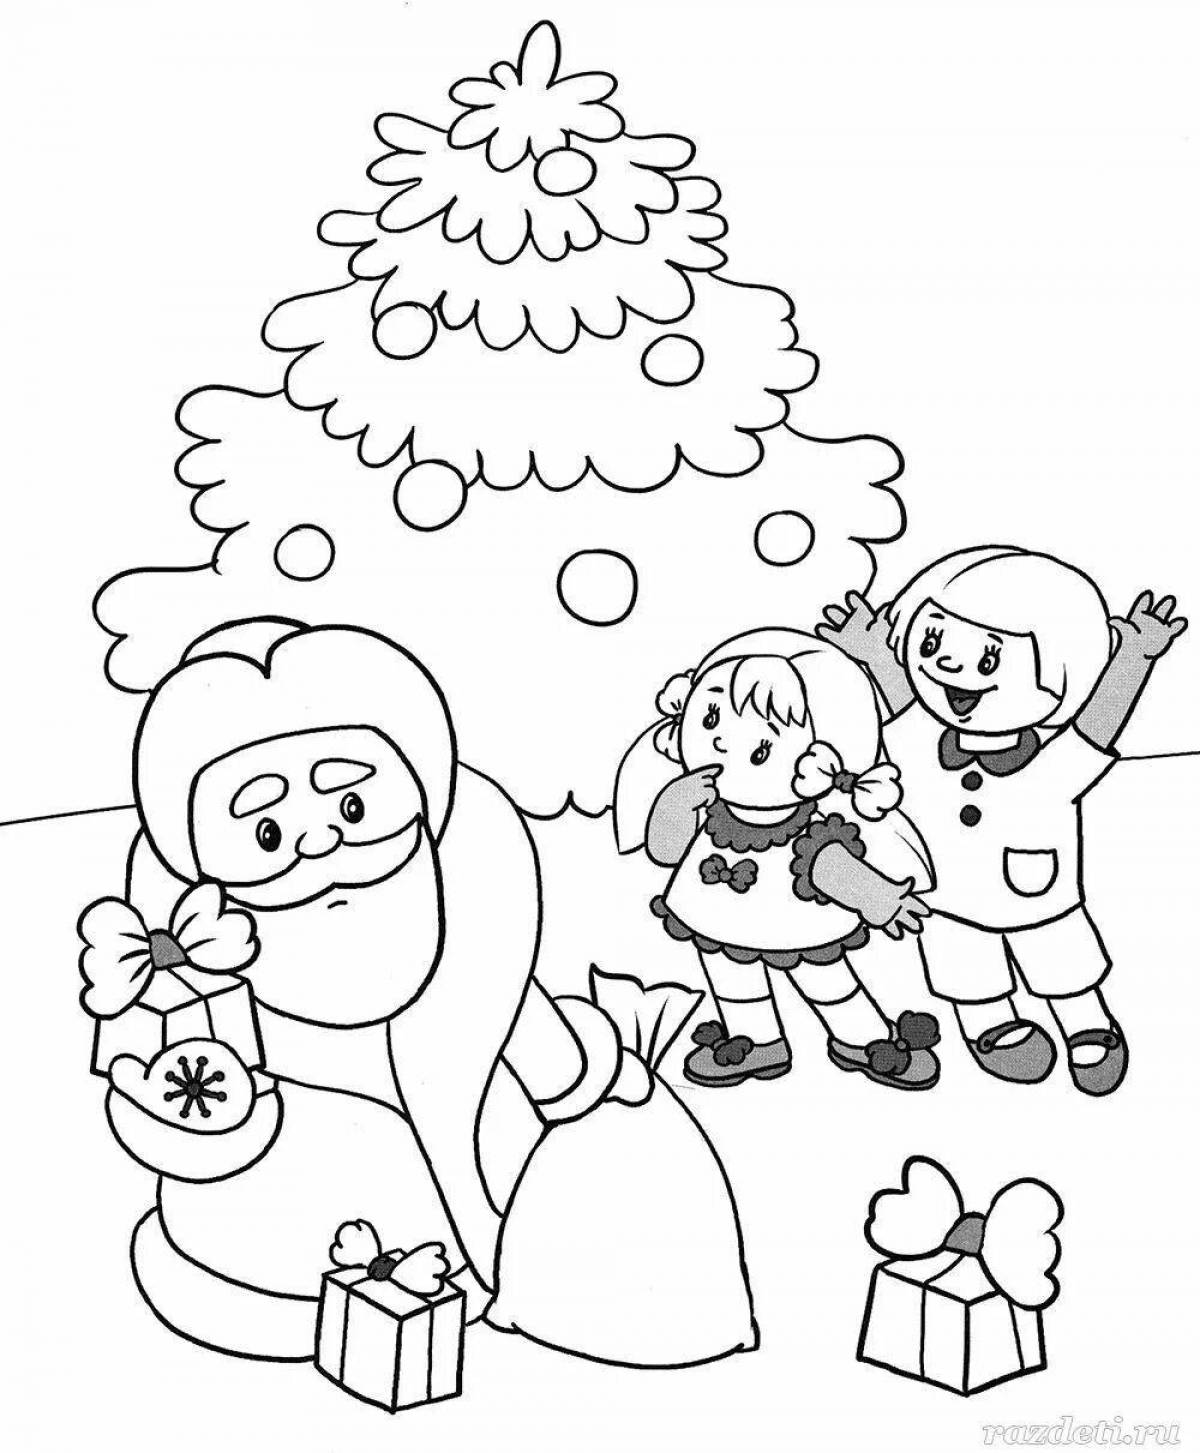 Gorgeous Christmas funny coloring book